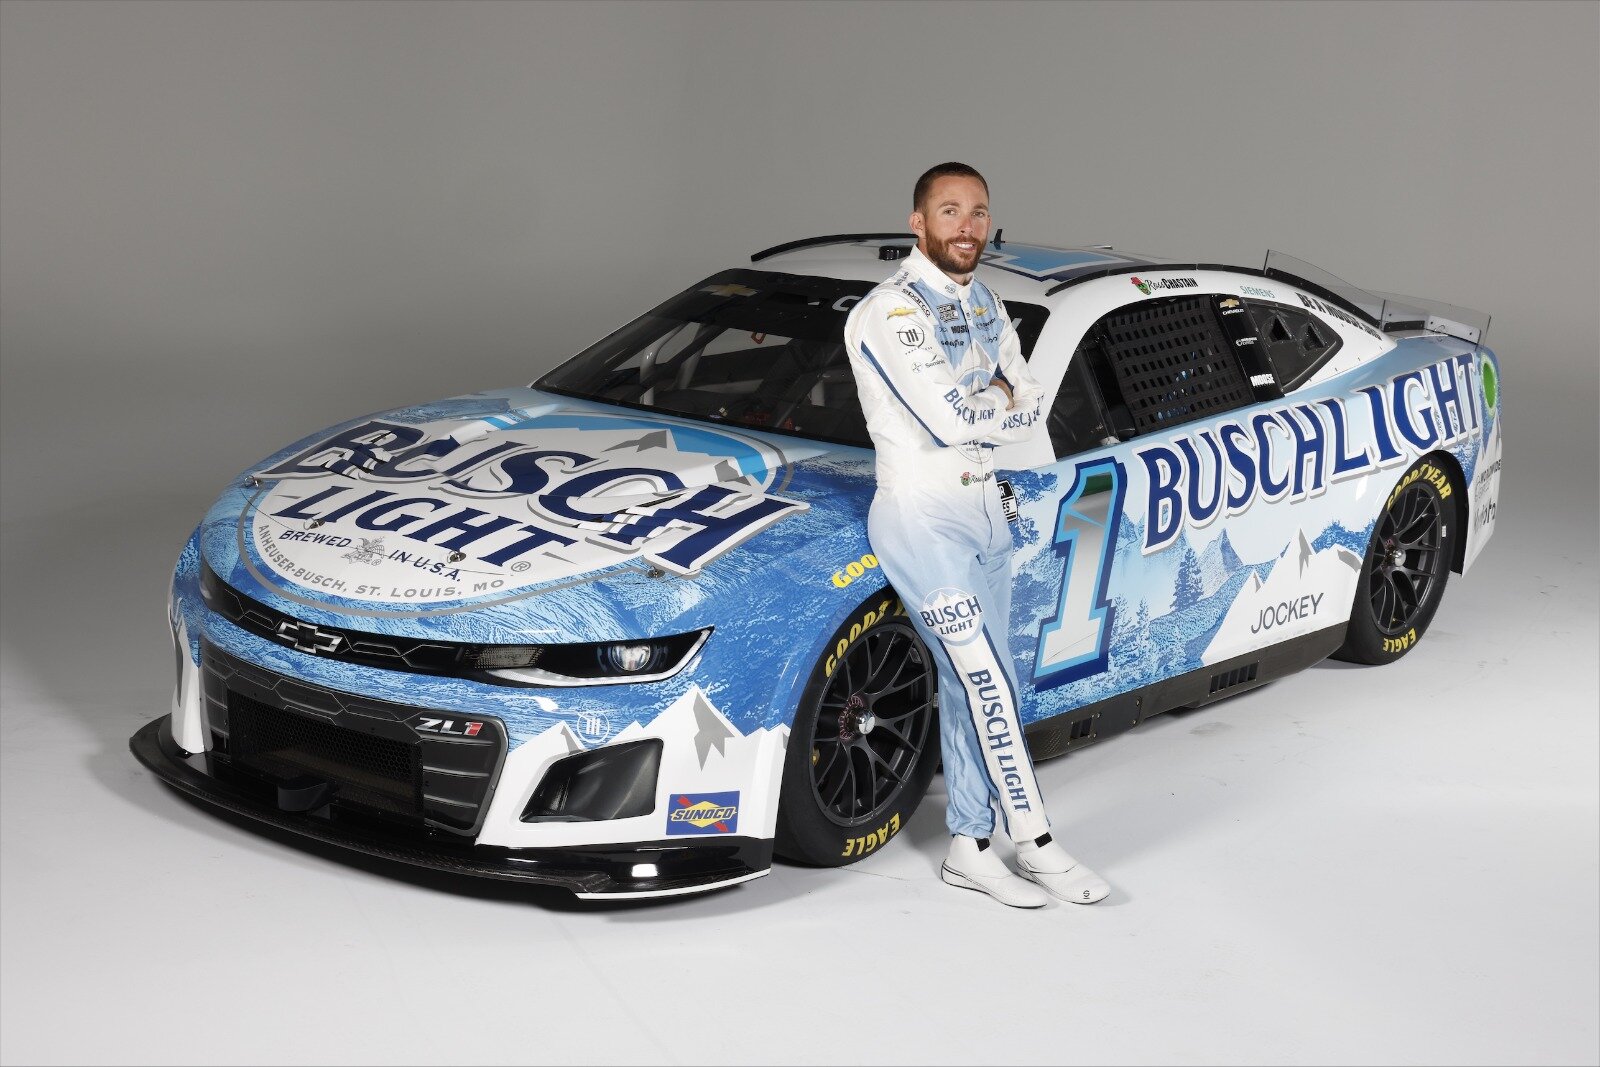 Busch Light Unveils ‘Iconic’ Paint Scheme For First Nascar Season With Ross Chastain And Trackhouse Racing